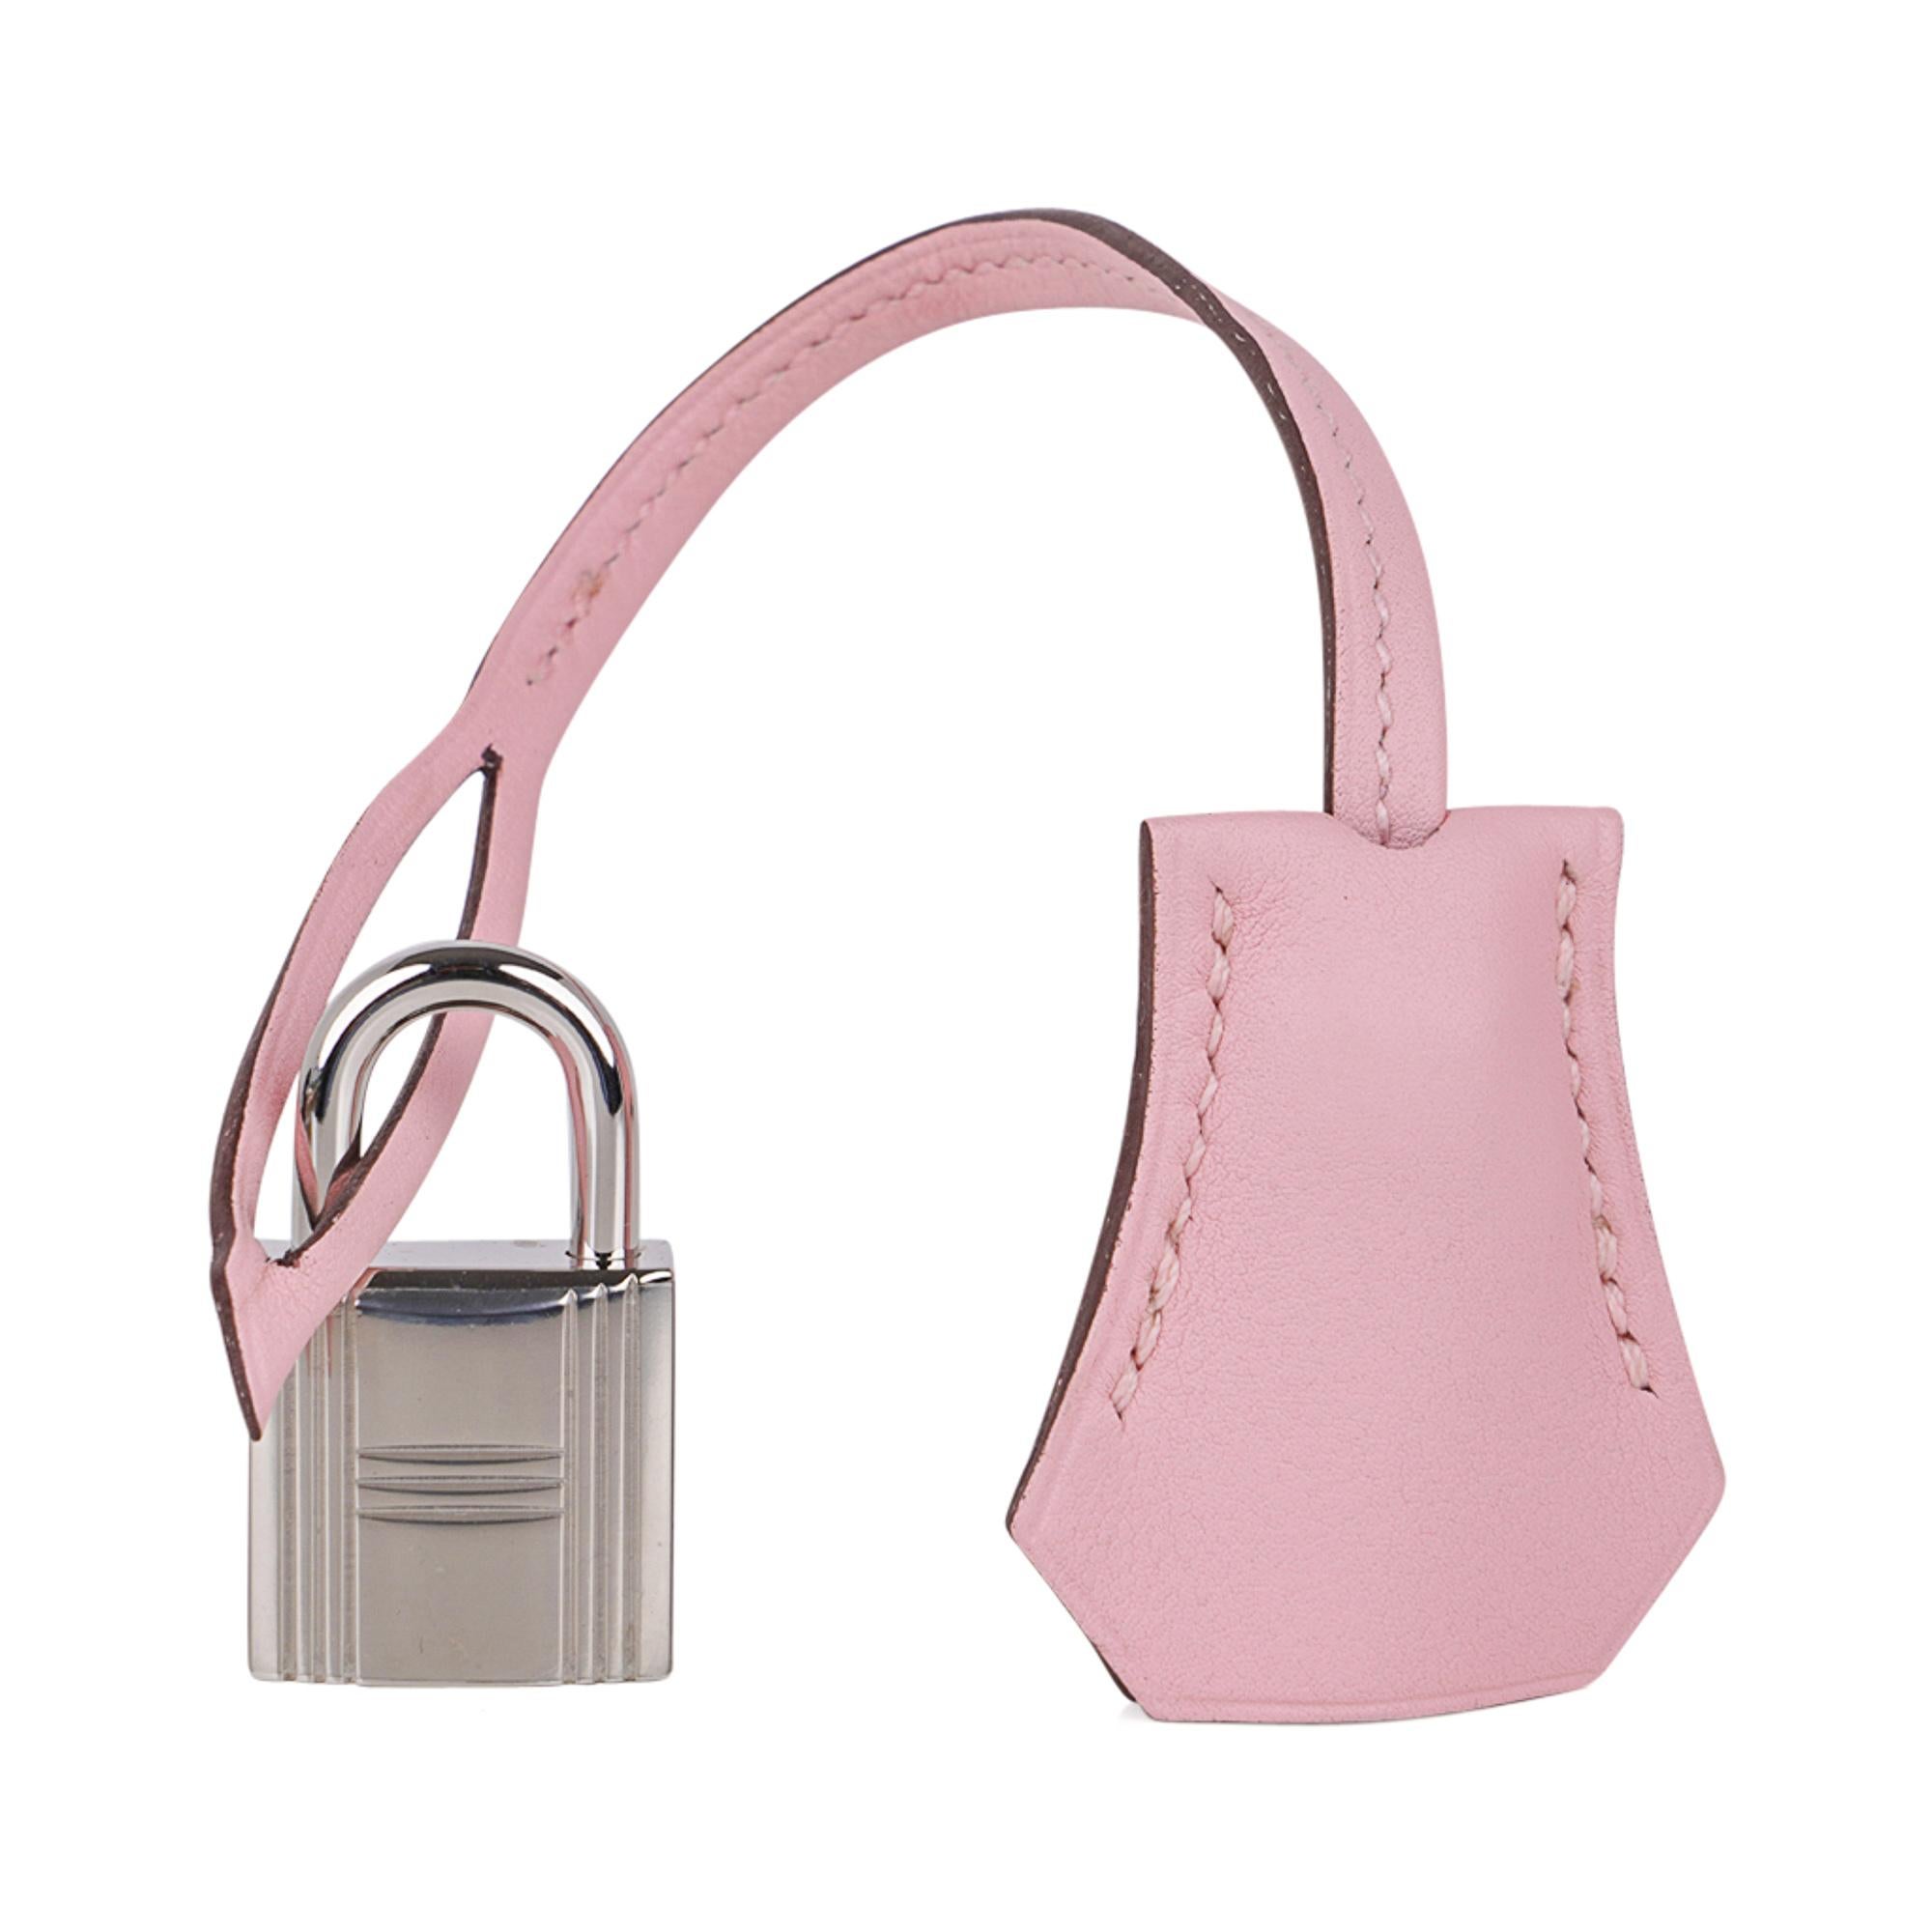 Mightychic offers a guaranteed authentic Hermes Birkin 25 bag featured in elusive Rose Sakura.
Gorgeous cherry blossom pink in swift leather. 
Soft with palladium hardware.
NEW or NEVER WORN  
Comes with the lock and keys in the clochette, signature